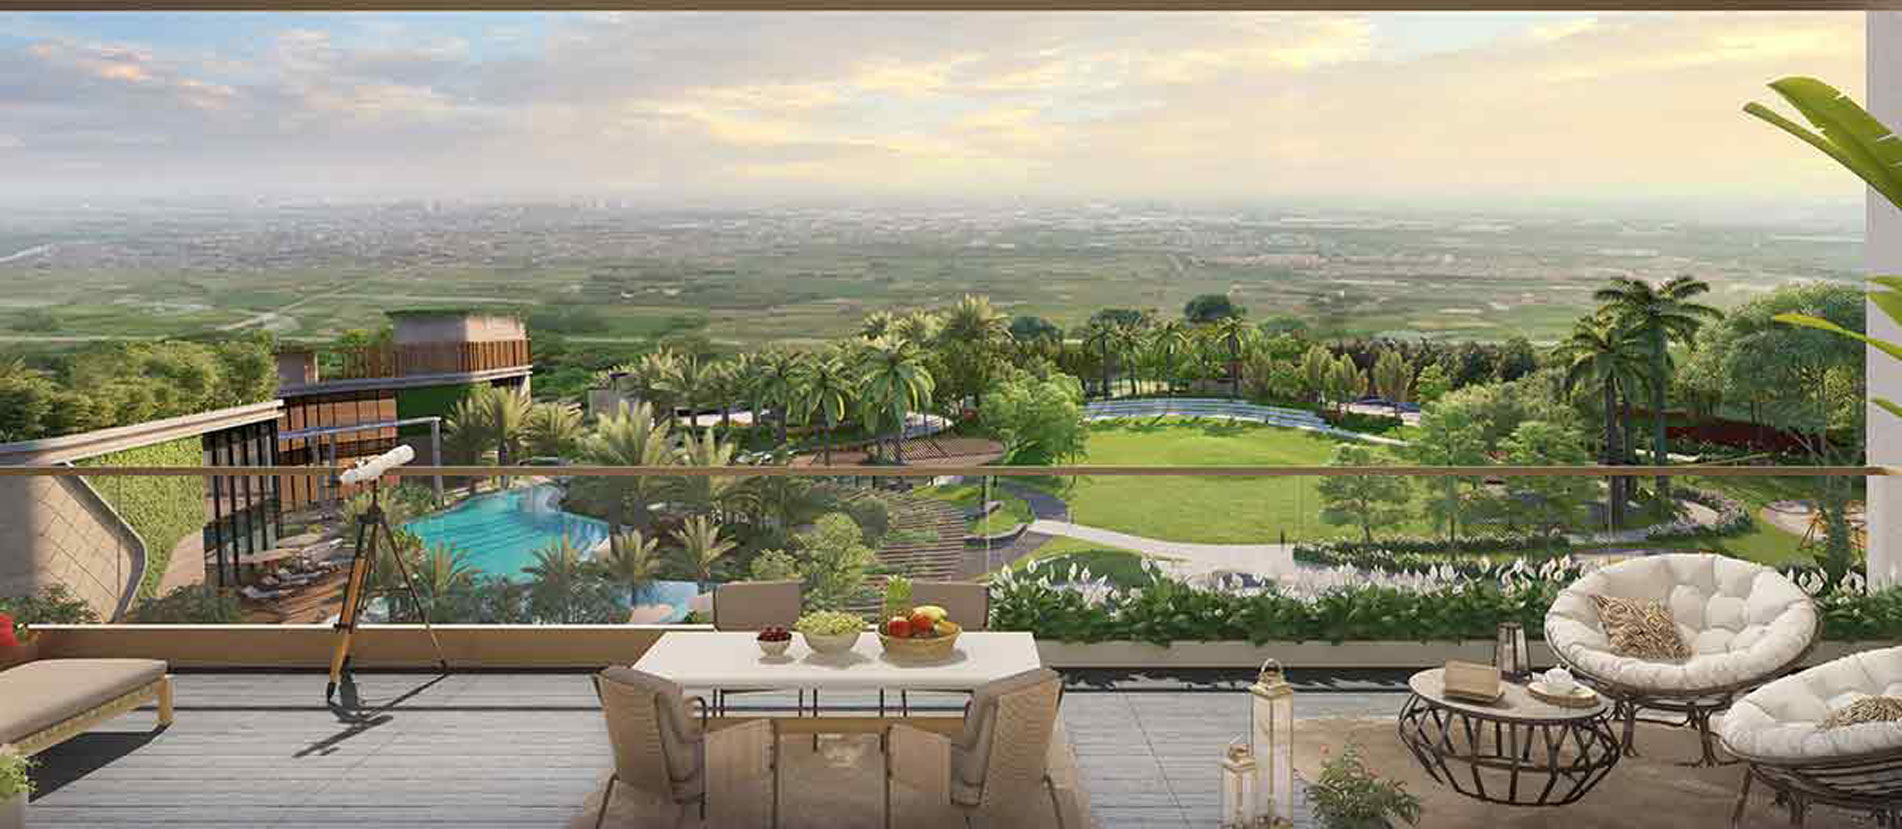 Discover the Luxury Apartment of Your Dreams at Godrej Sector 49 in Gurgaon